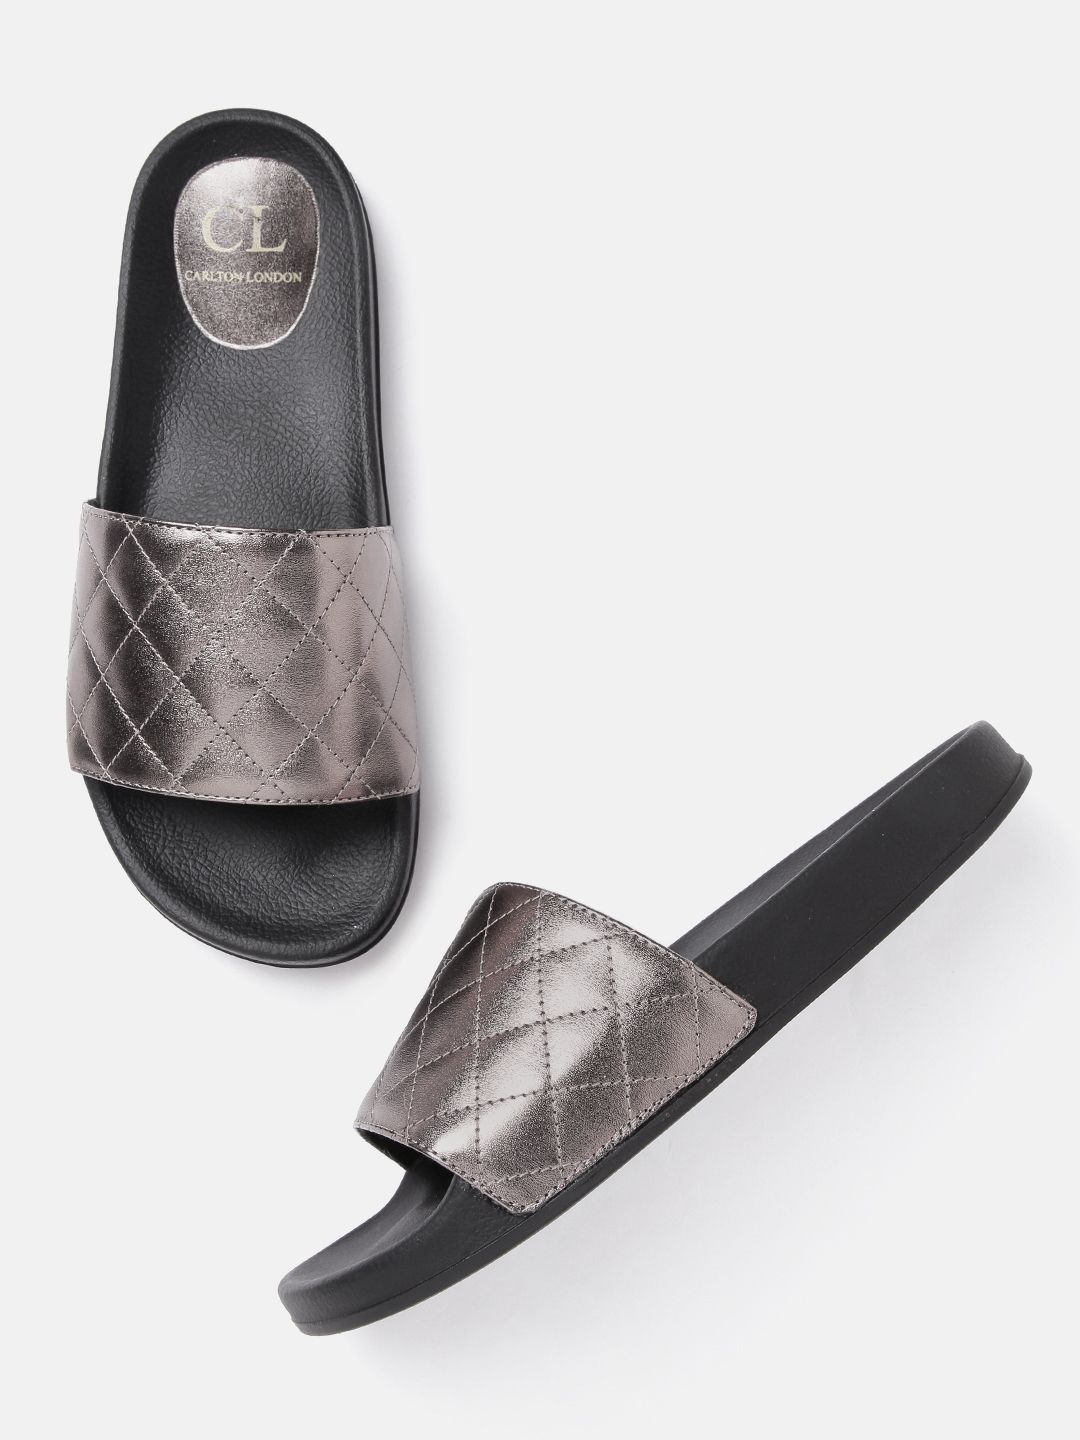 Carlton London Women Gunmetal-Toned Quilted Open Toe Flats Price in India